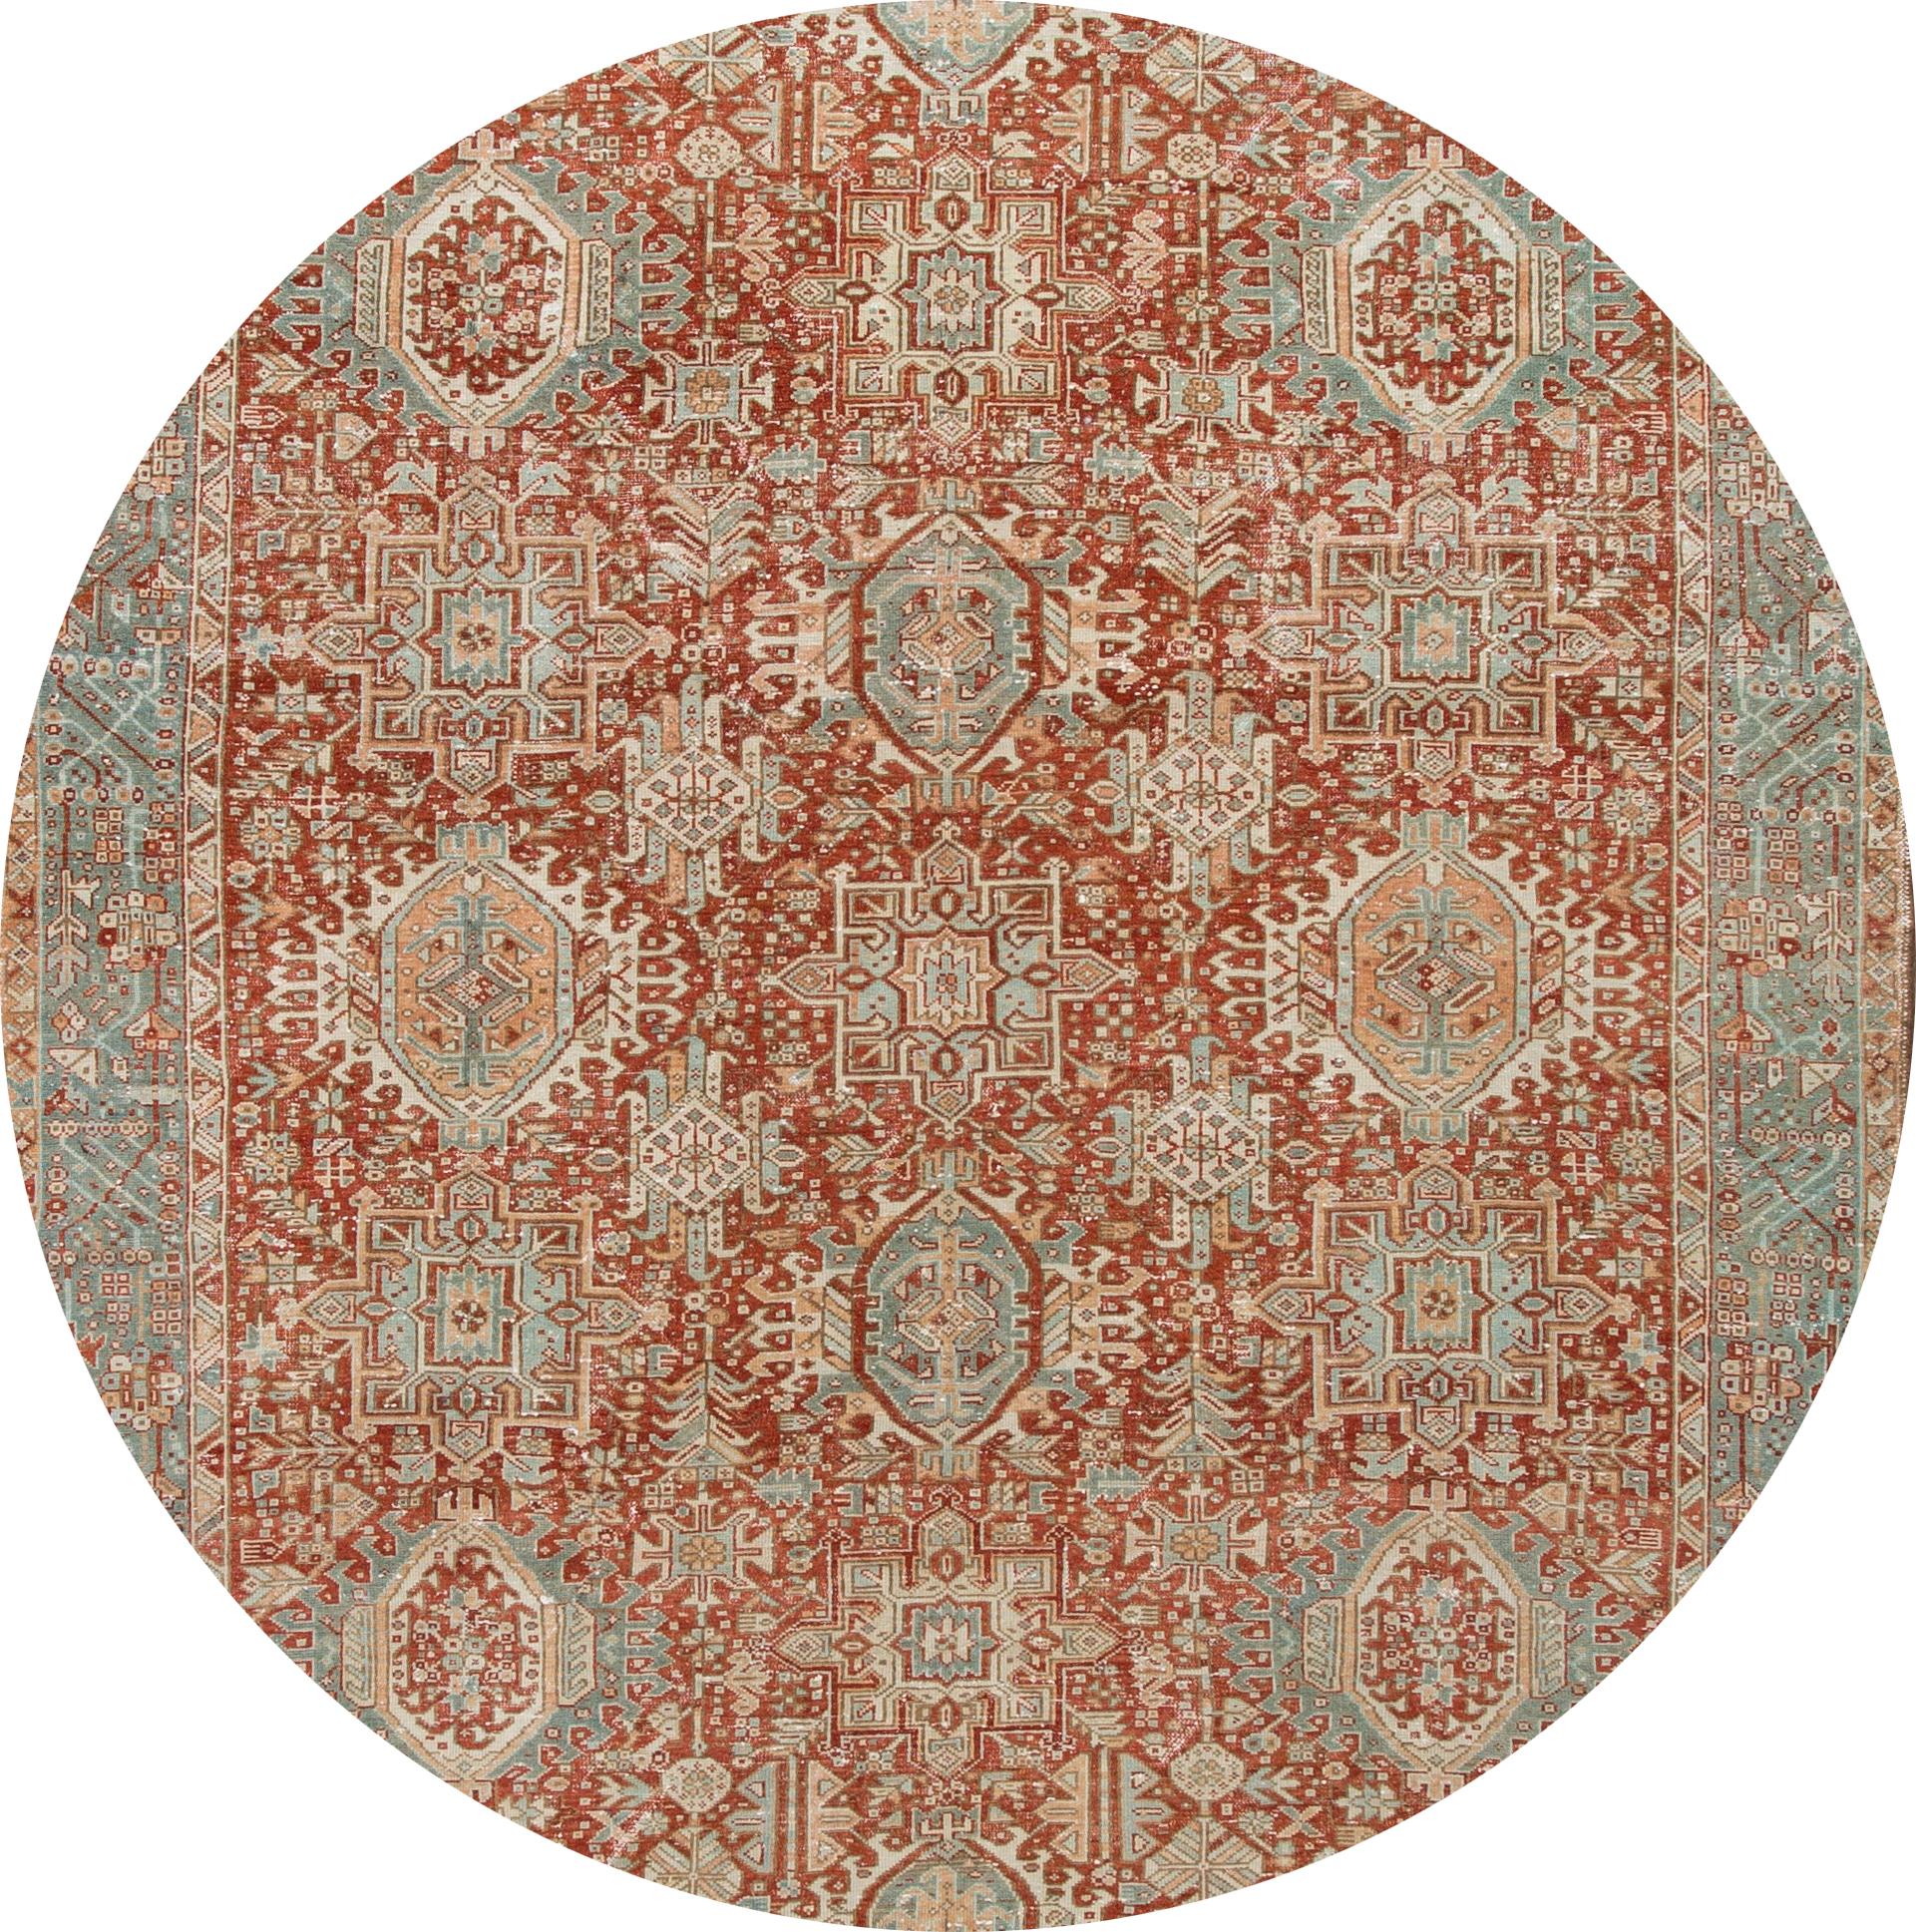 Beautiful 20th-century vintage Heriz wool rug with a rust field, ivory, blue, and peach accents in the all-over multi-medallion design.

This rug measures: 7'9” x 11'.